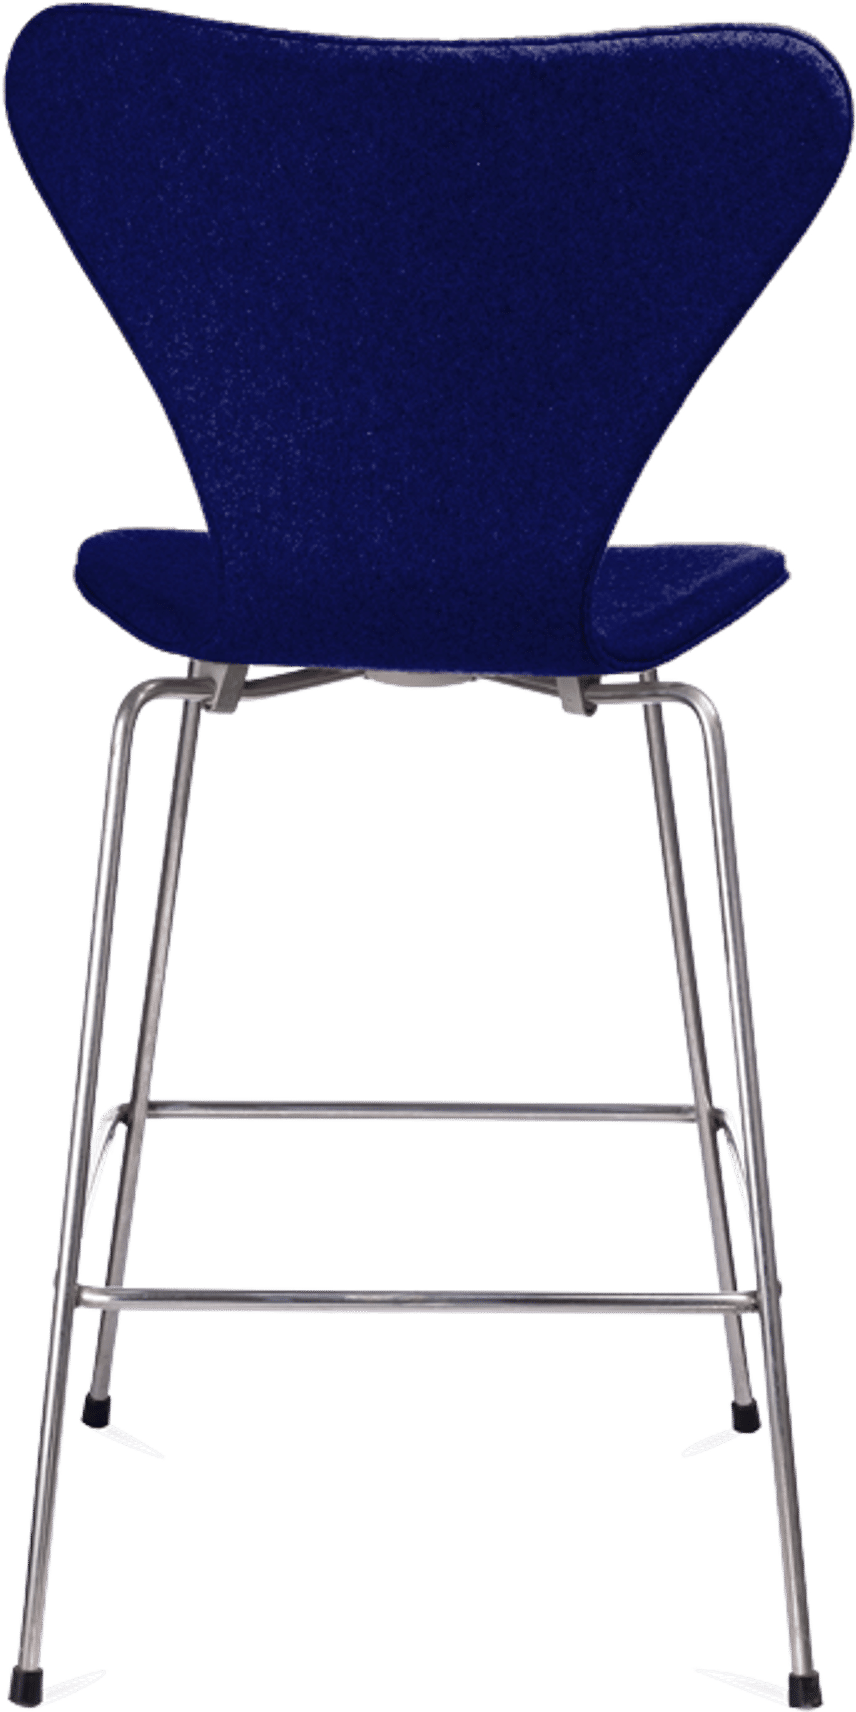 Series 7 Counter Stool Upholstered Blue image.